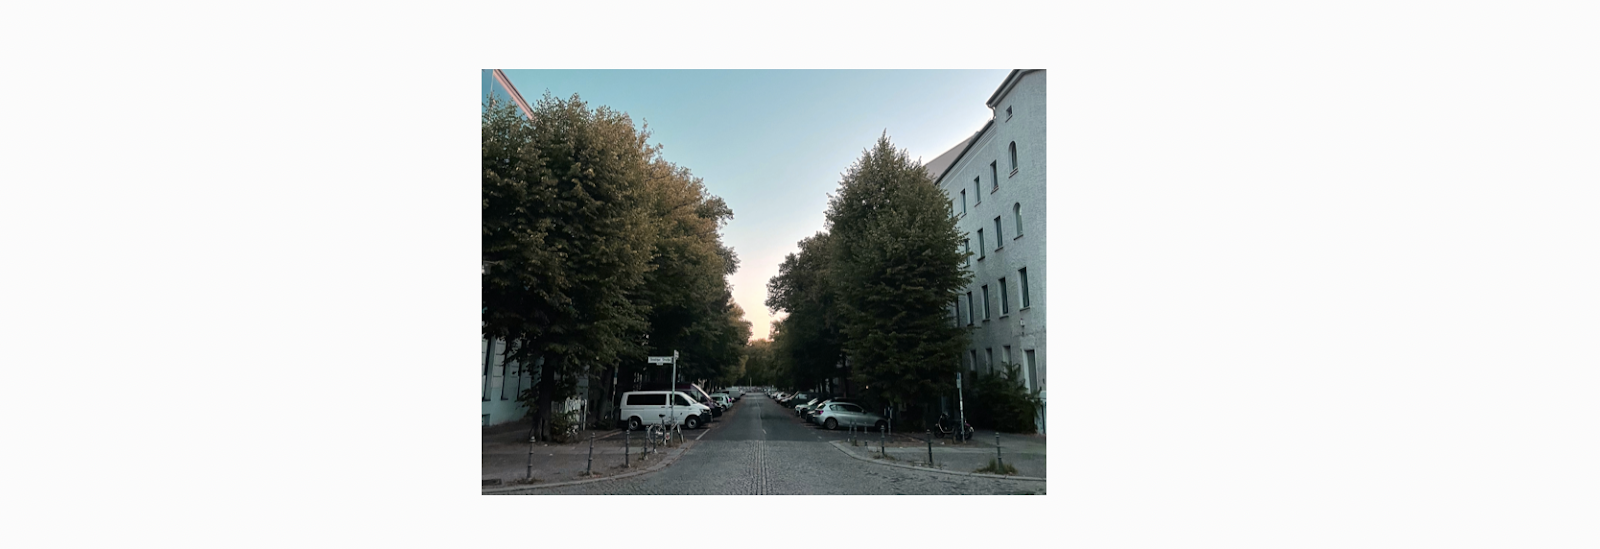 On The City and Its Ghosts - Berlin